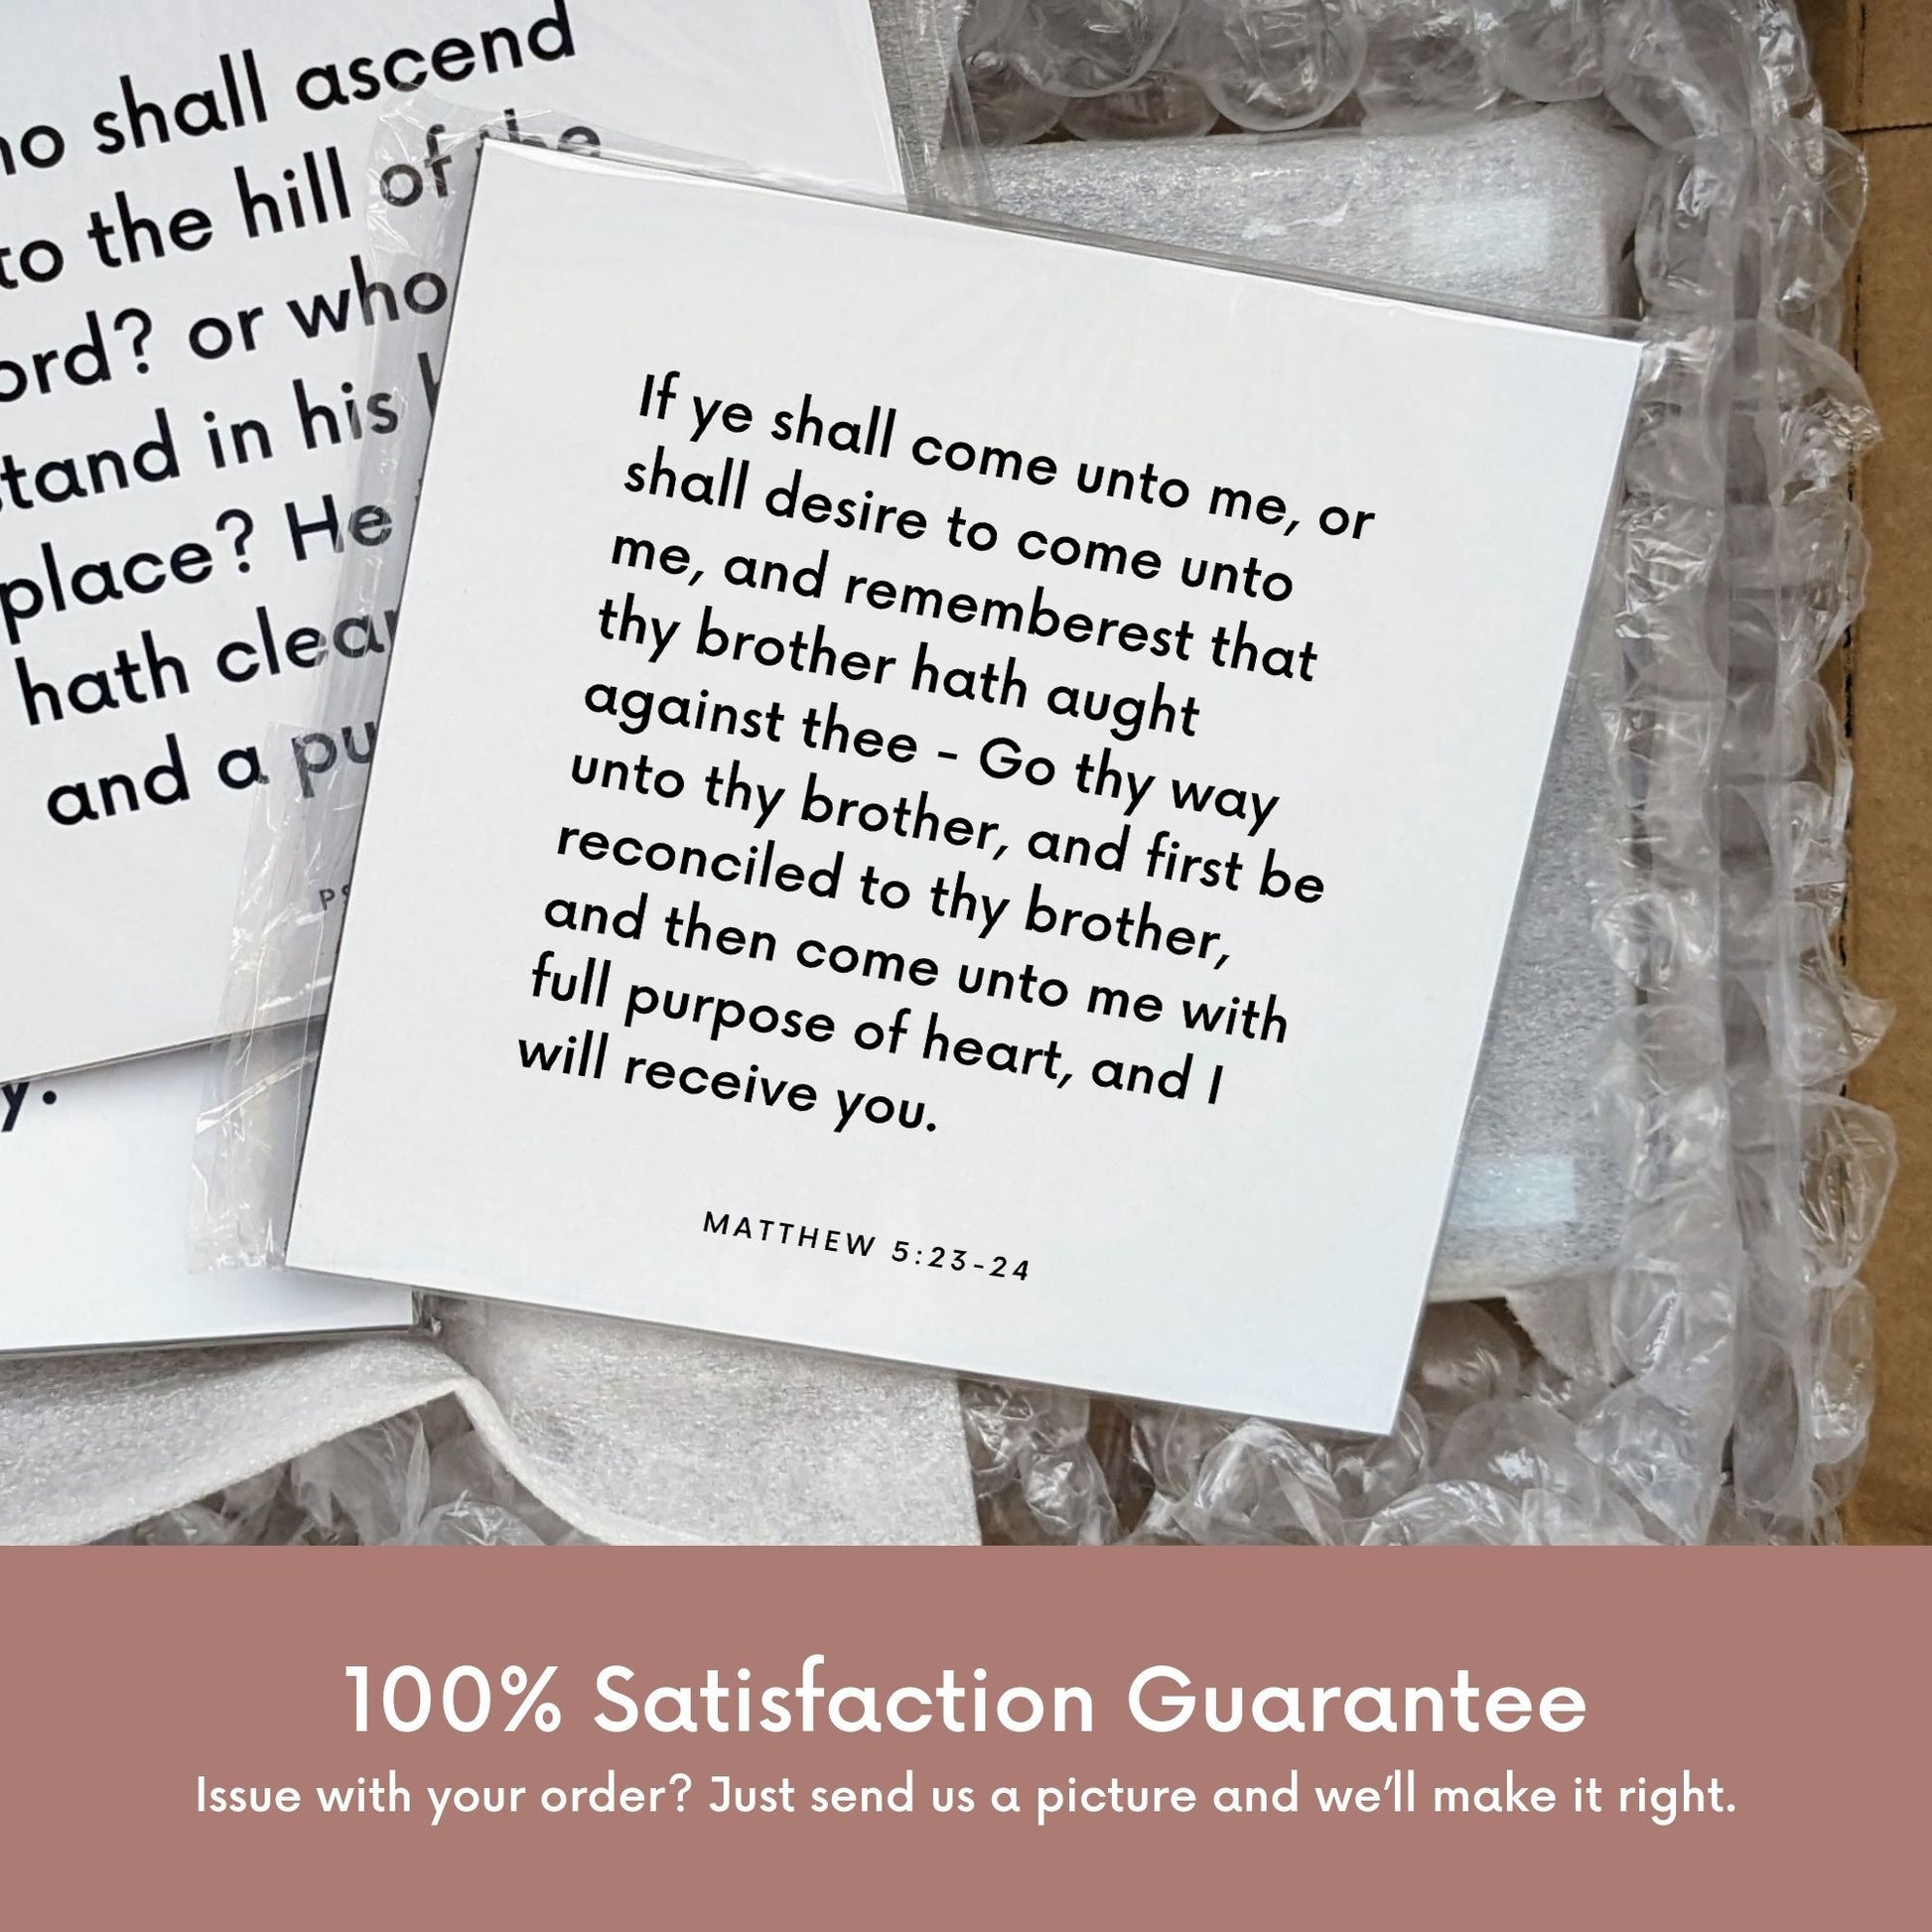 Shipping materials for scripture tile of Matthew 5:23-24 - "Go thy way unto thy brother, and first be reconciled"